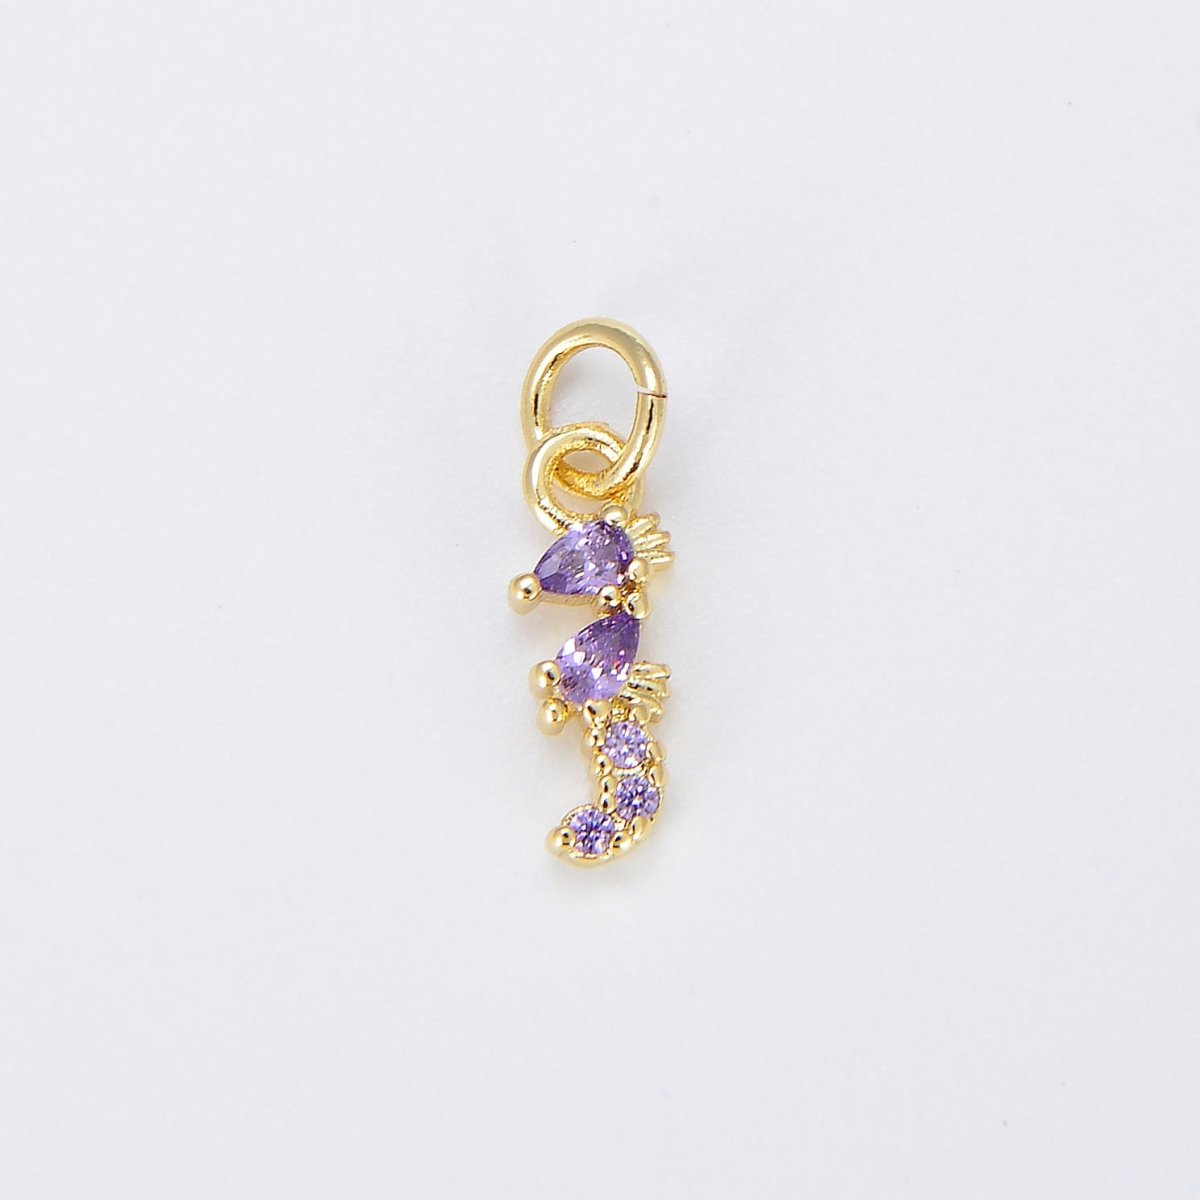 Tiny Sea Horse Charm Dainty Seahorse Pendant 14kt Gold Filled Charm Animal Charm Cubic Purple Under the sea Inspired E-876 - DLUXCA